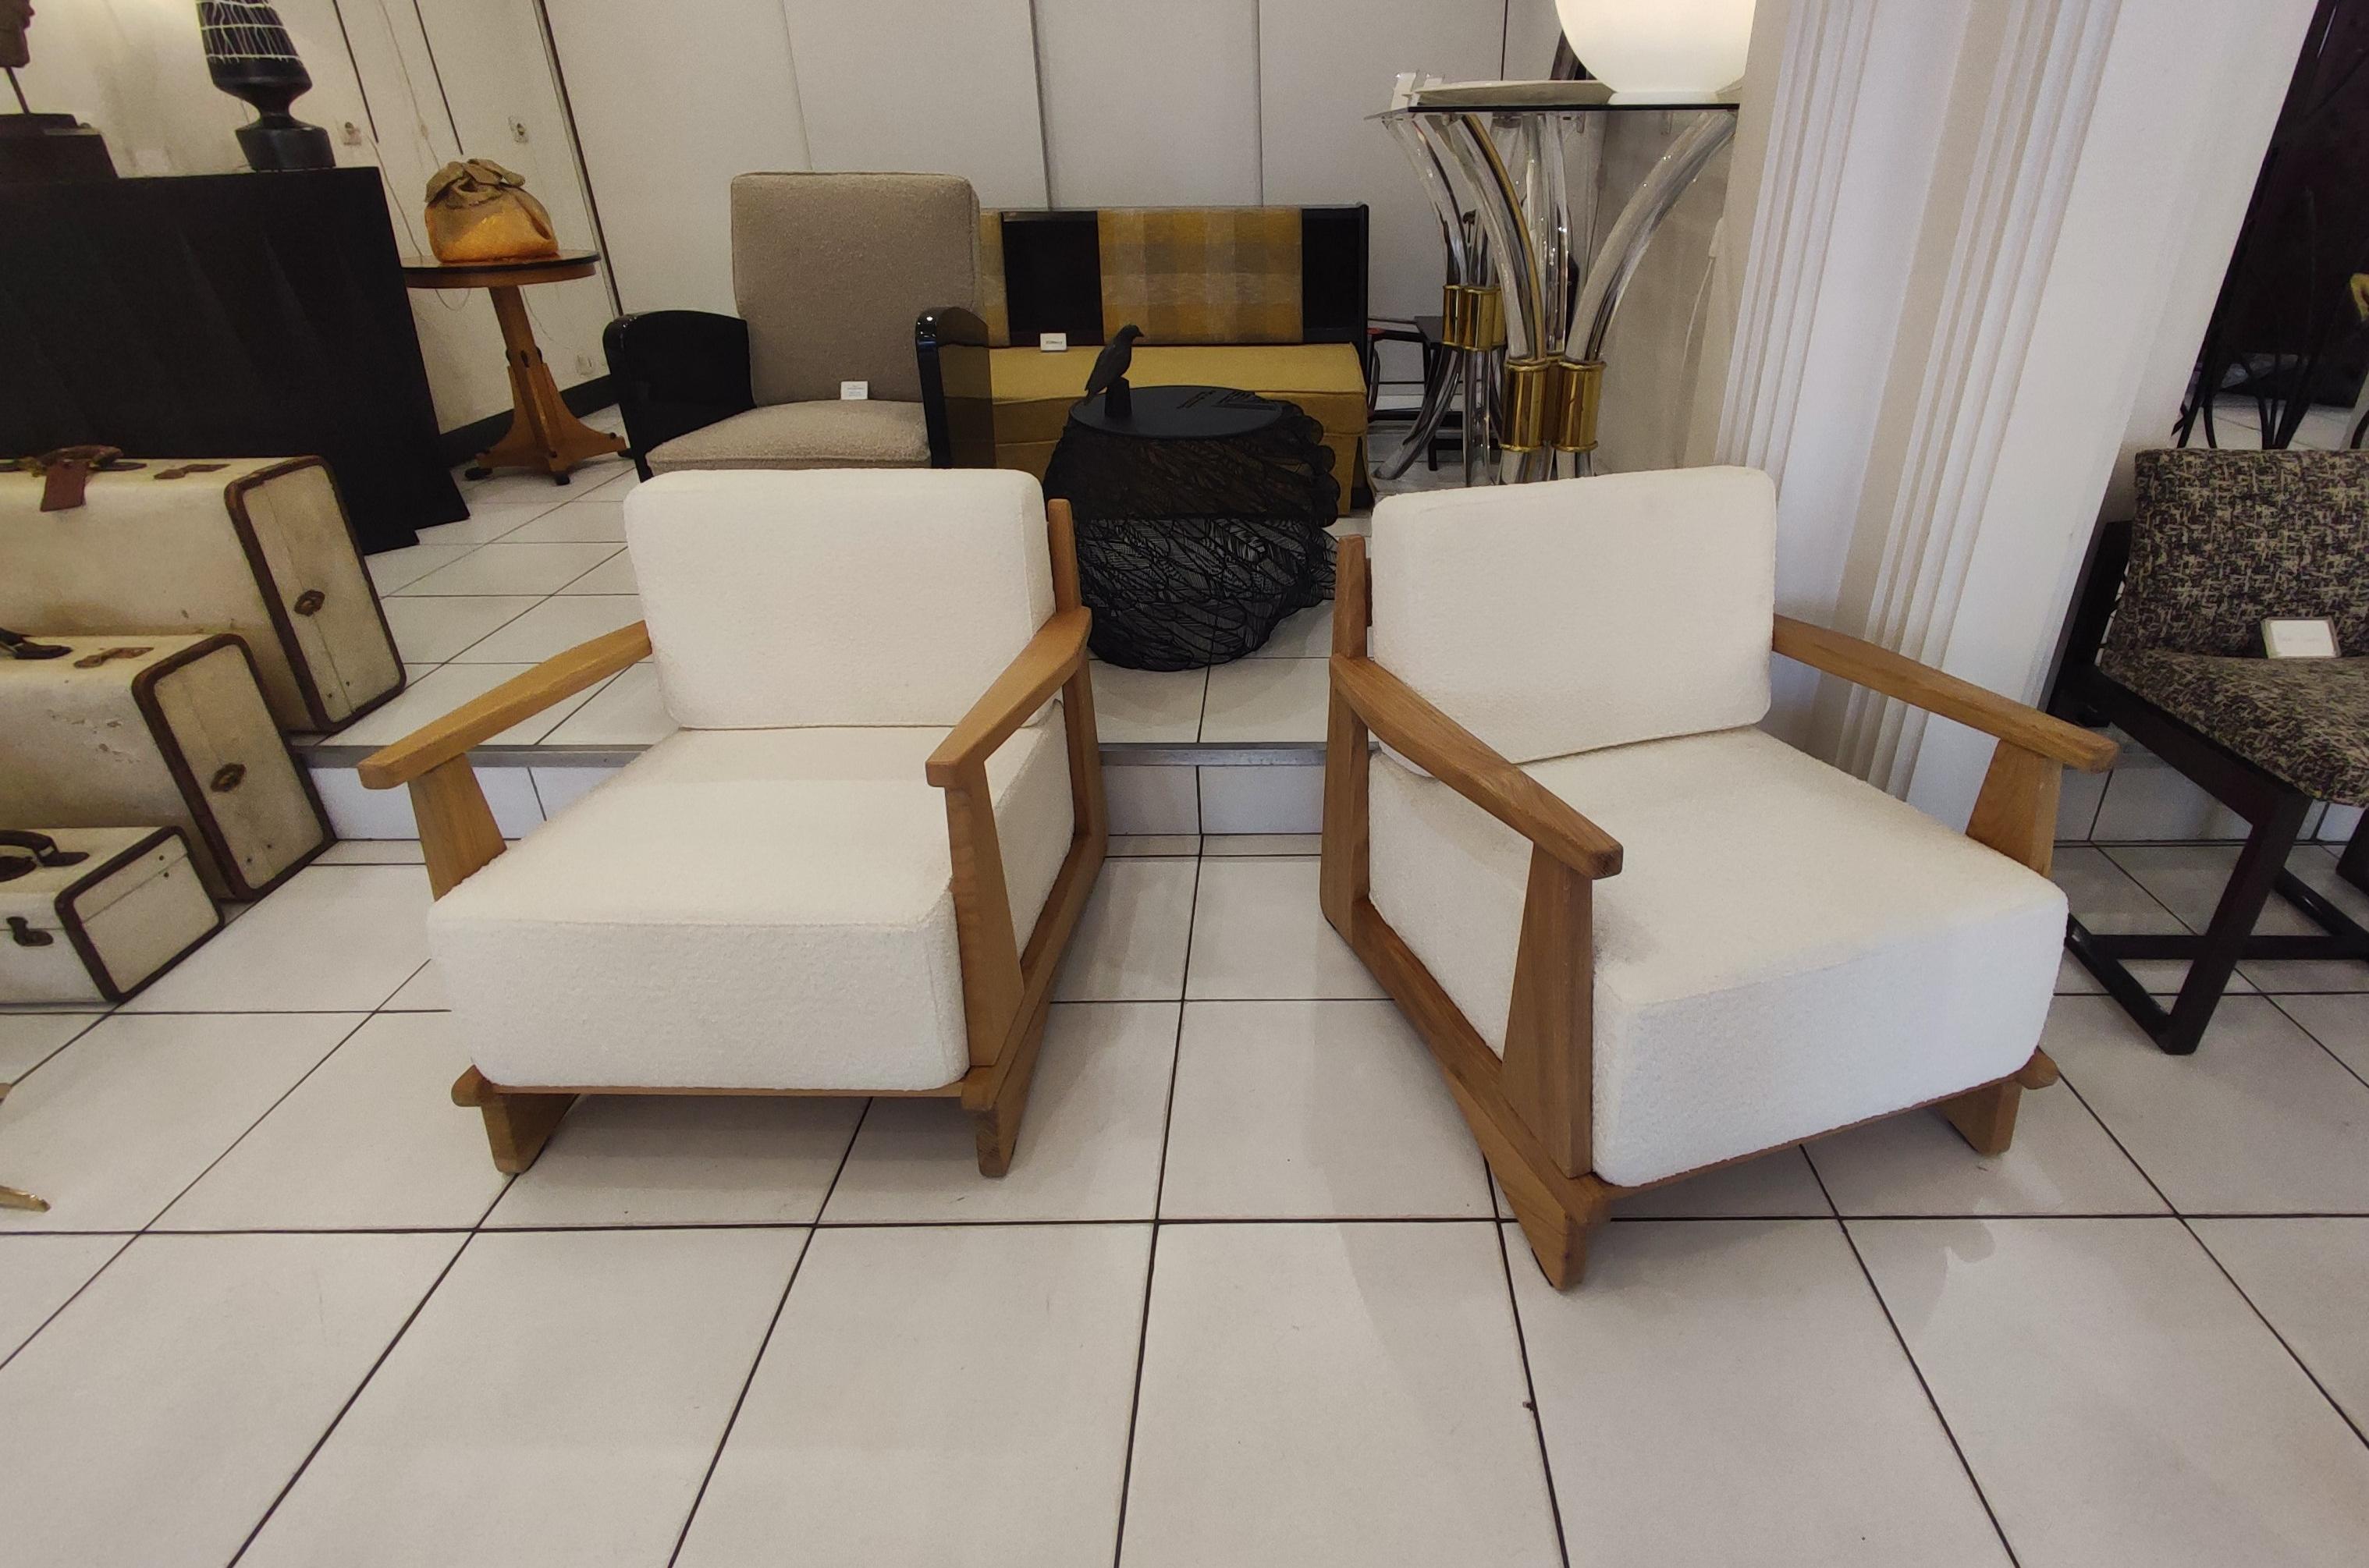 Pair of massive oak wood armchairs, Attb Maison Regain, reupholstered with white bouclette fabric.